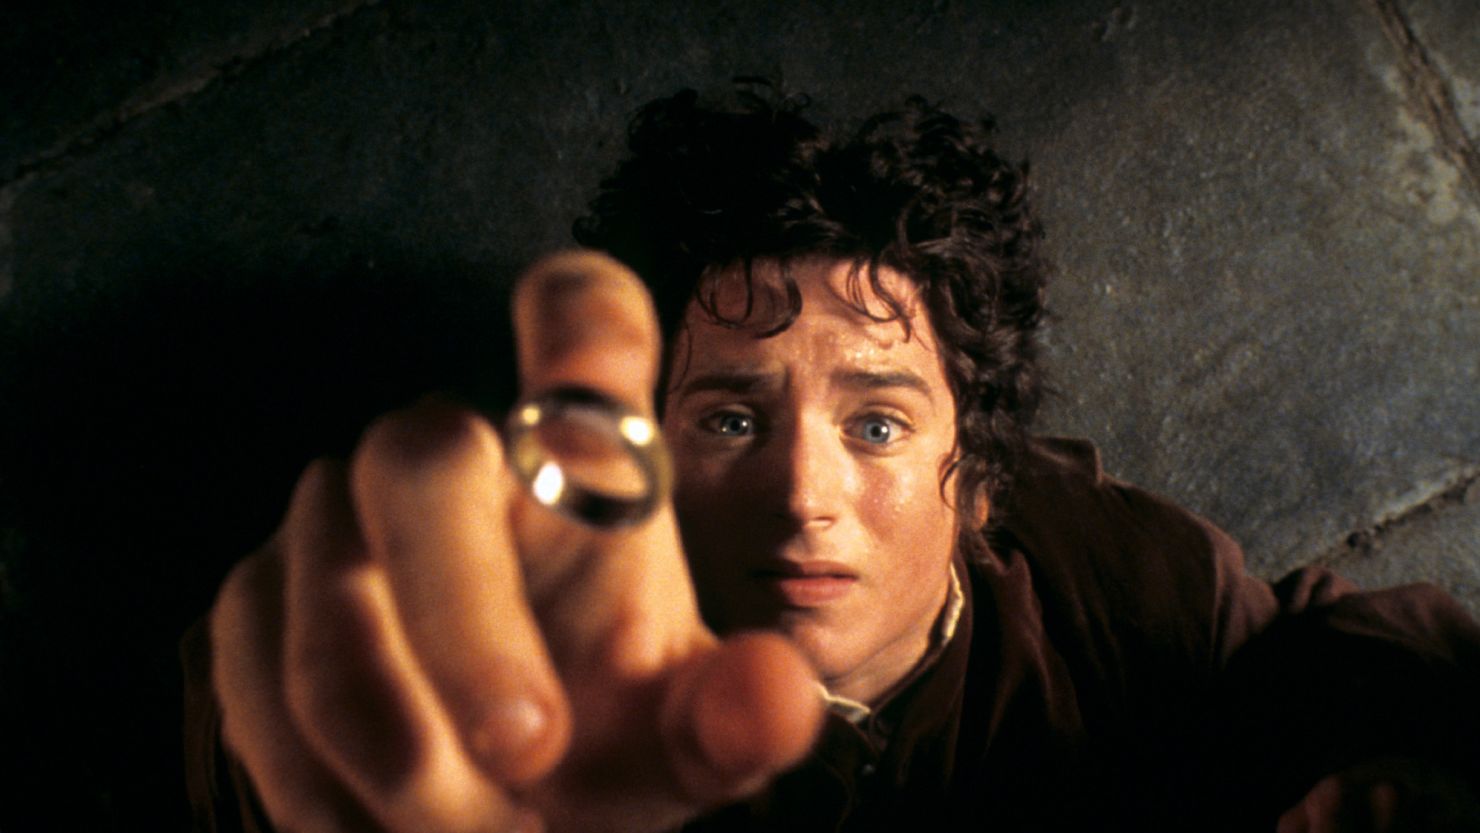 Studios Announces Wave 2 of Casting for Lord of the Rings TV Show